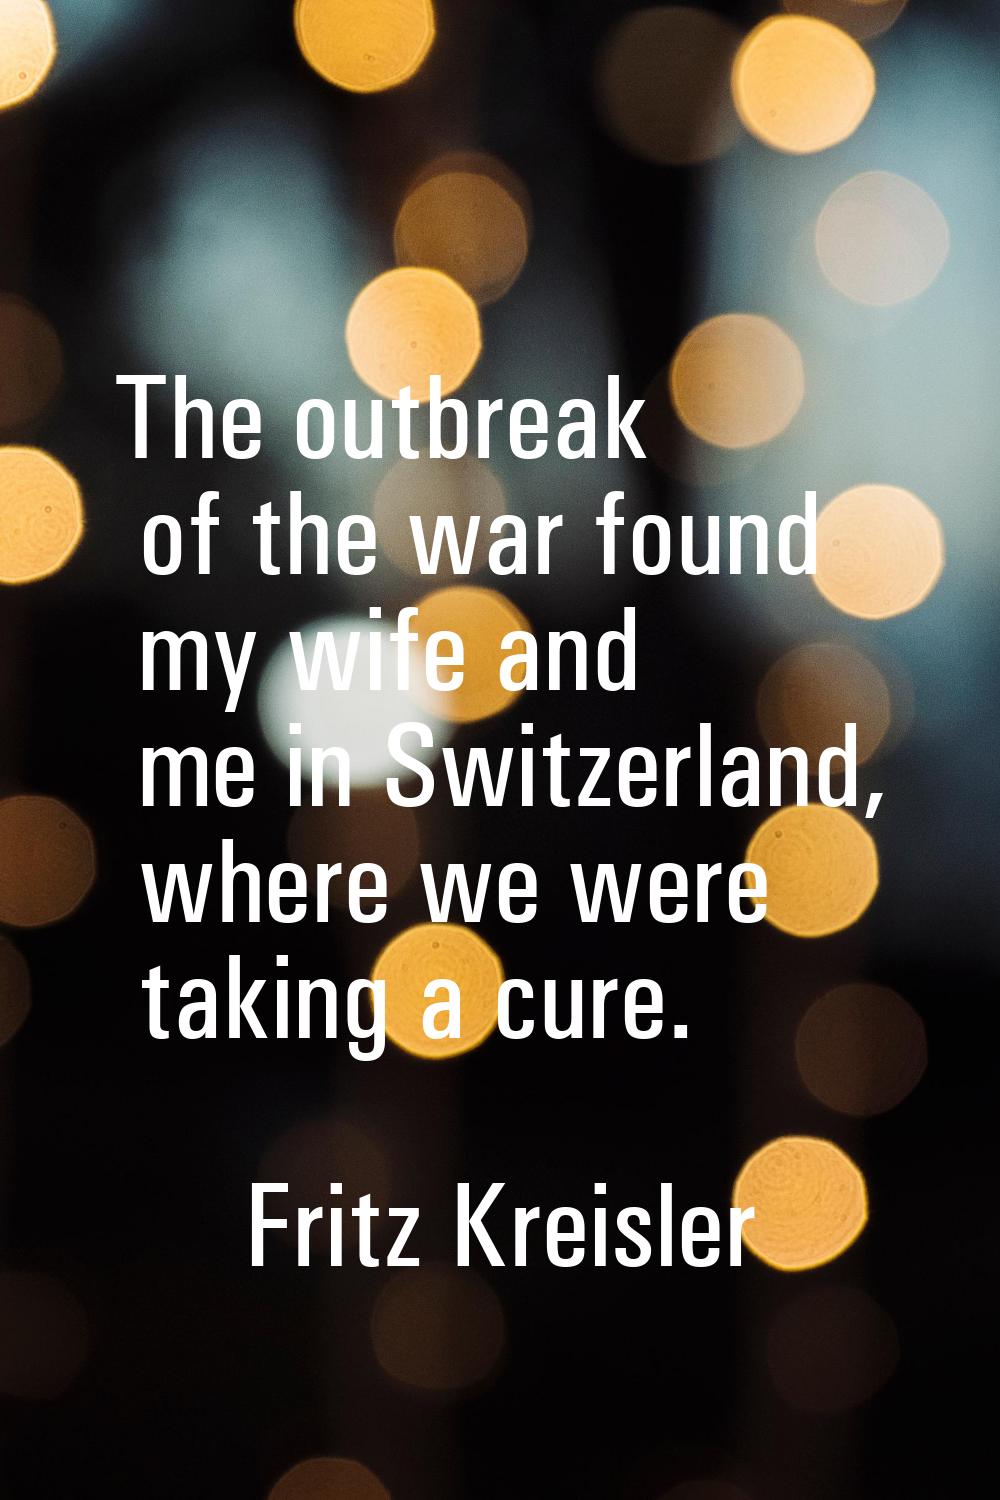 The outbreak of the war found my wife and me in Switzerland, where we were taking a cure.